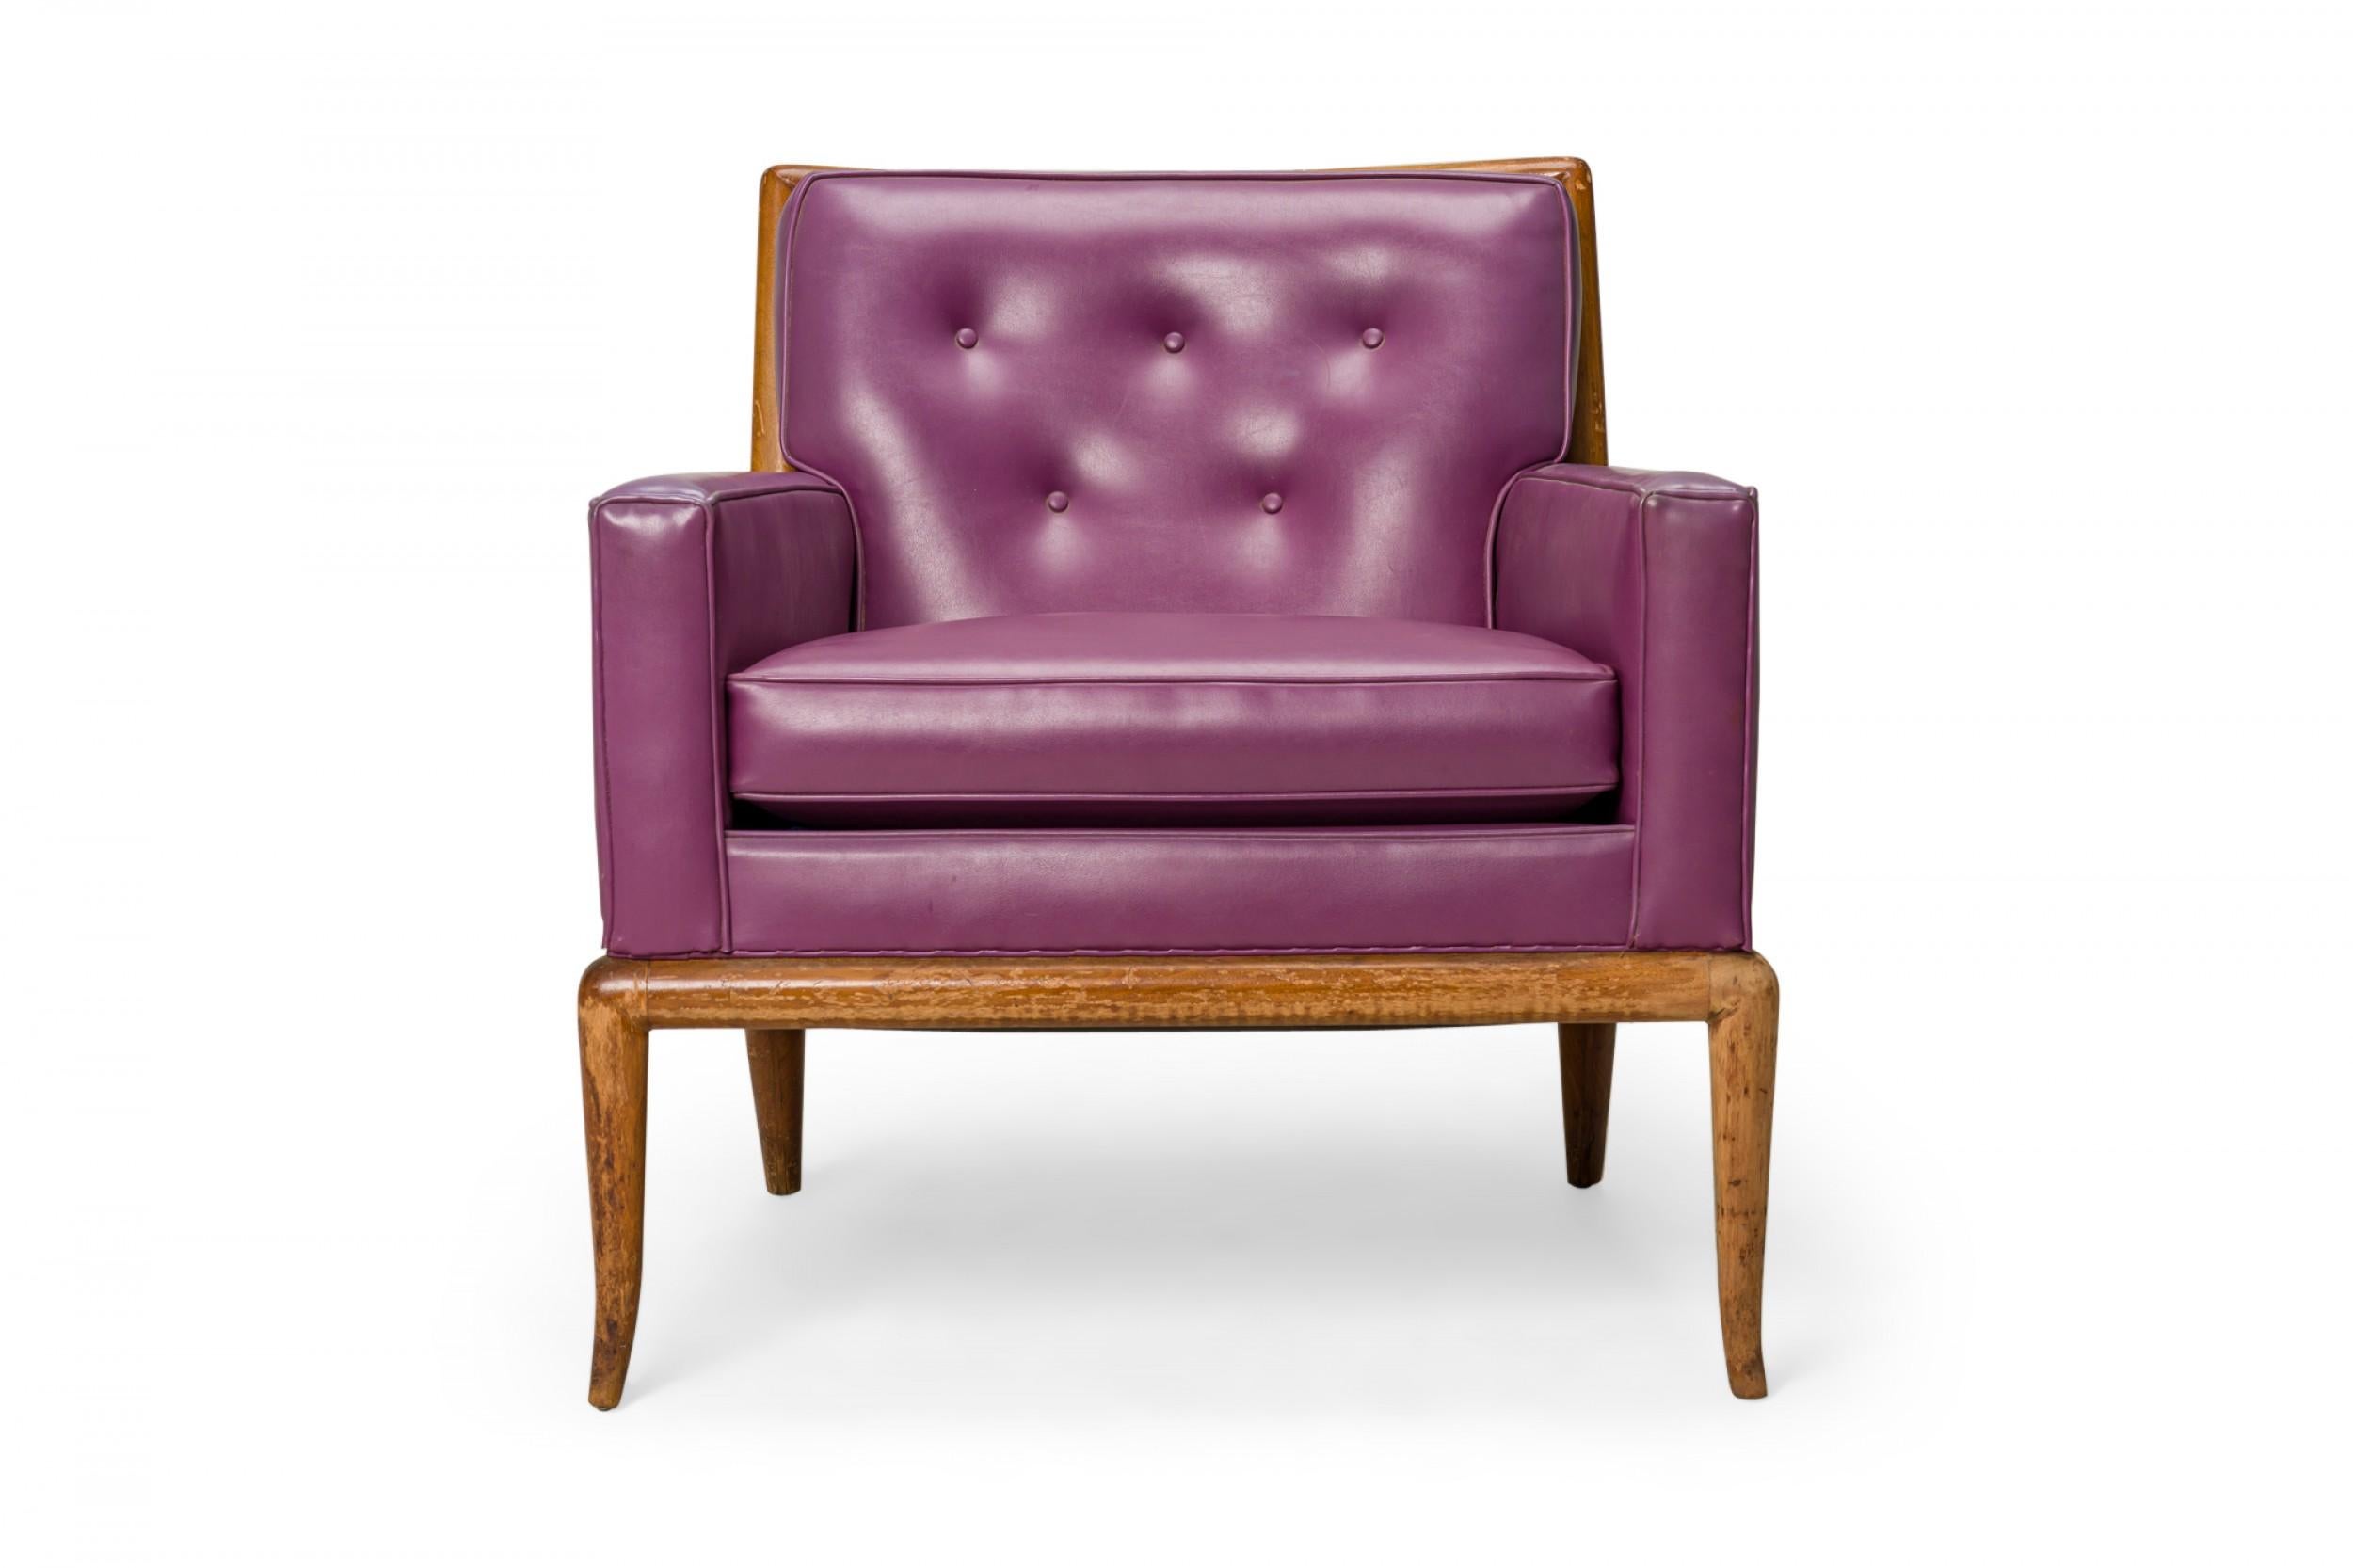 American mid-century lounge / armchair with a square walnut frame and purple vinyl upholstery with a button-tufted back, resting on four slightly curved and tapered walnut legs. (T.H. Robsjohn-gibbings for Widdicomb Furniture Co.).
    